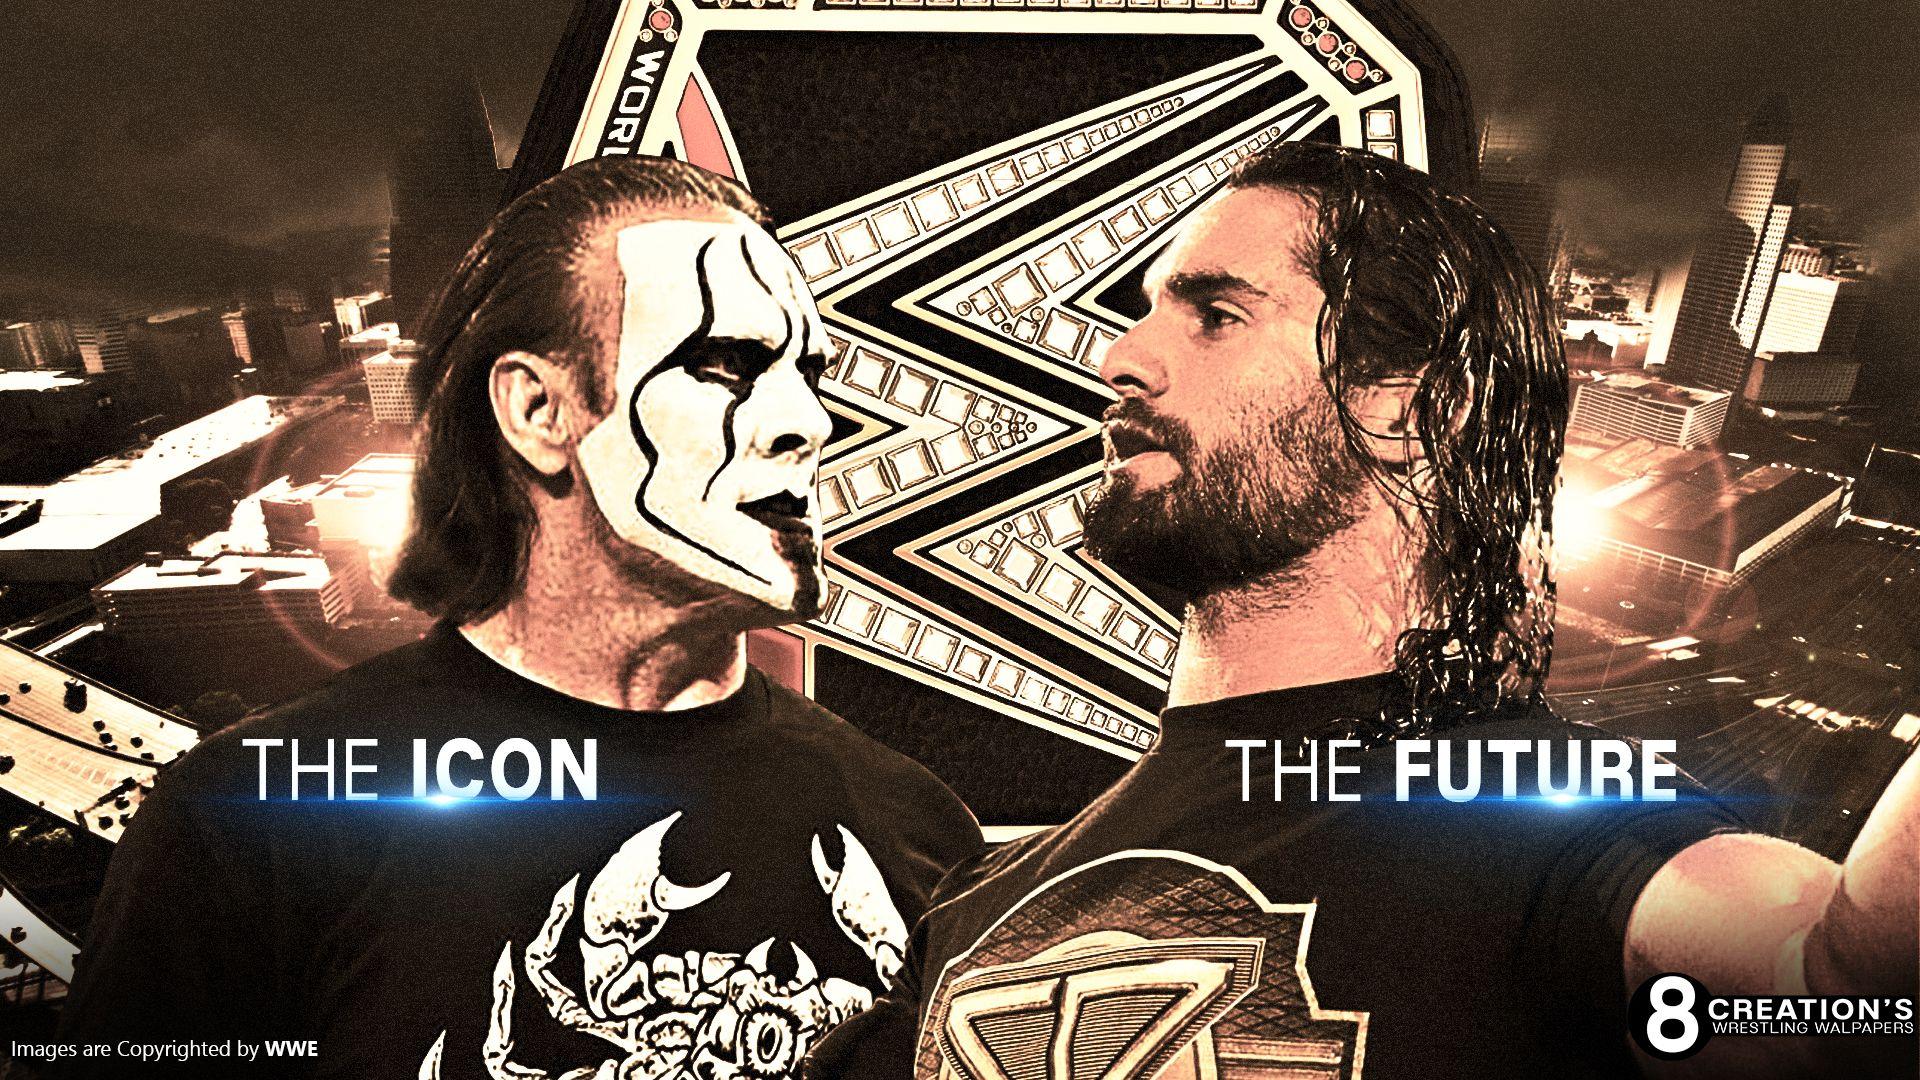 Wwe Seth Rollins and Sting Wallpaper